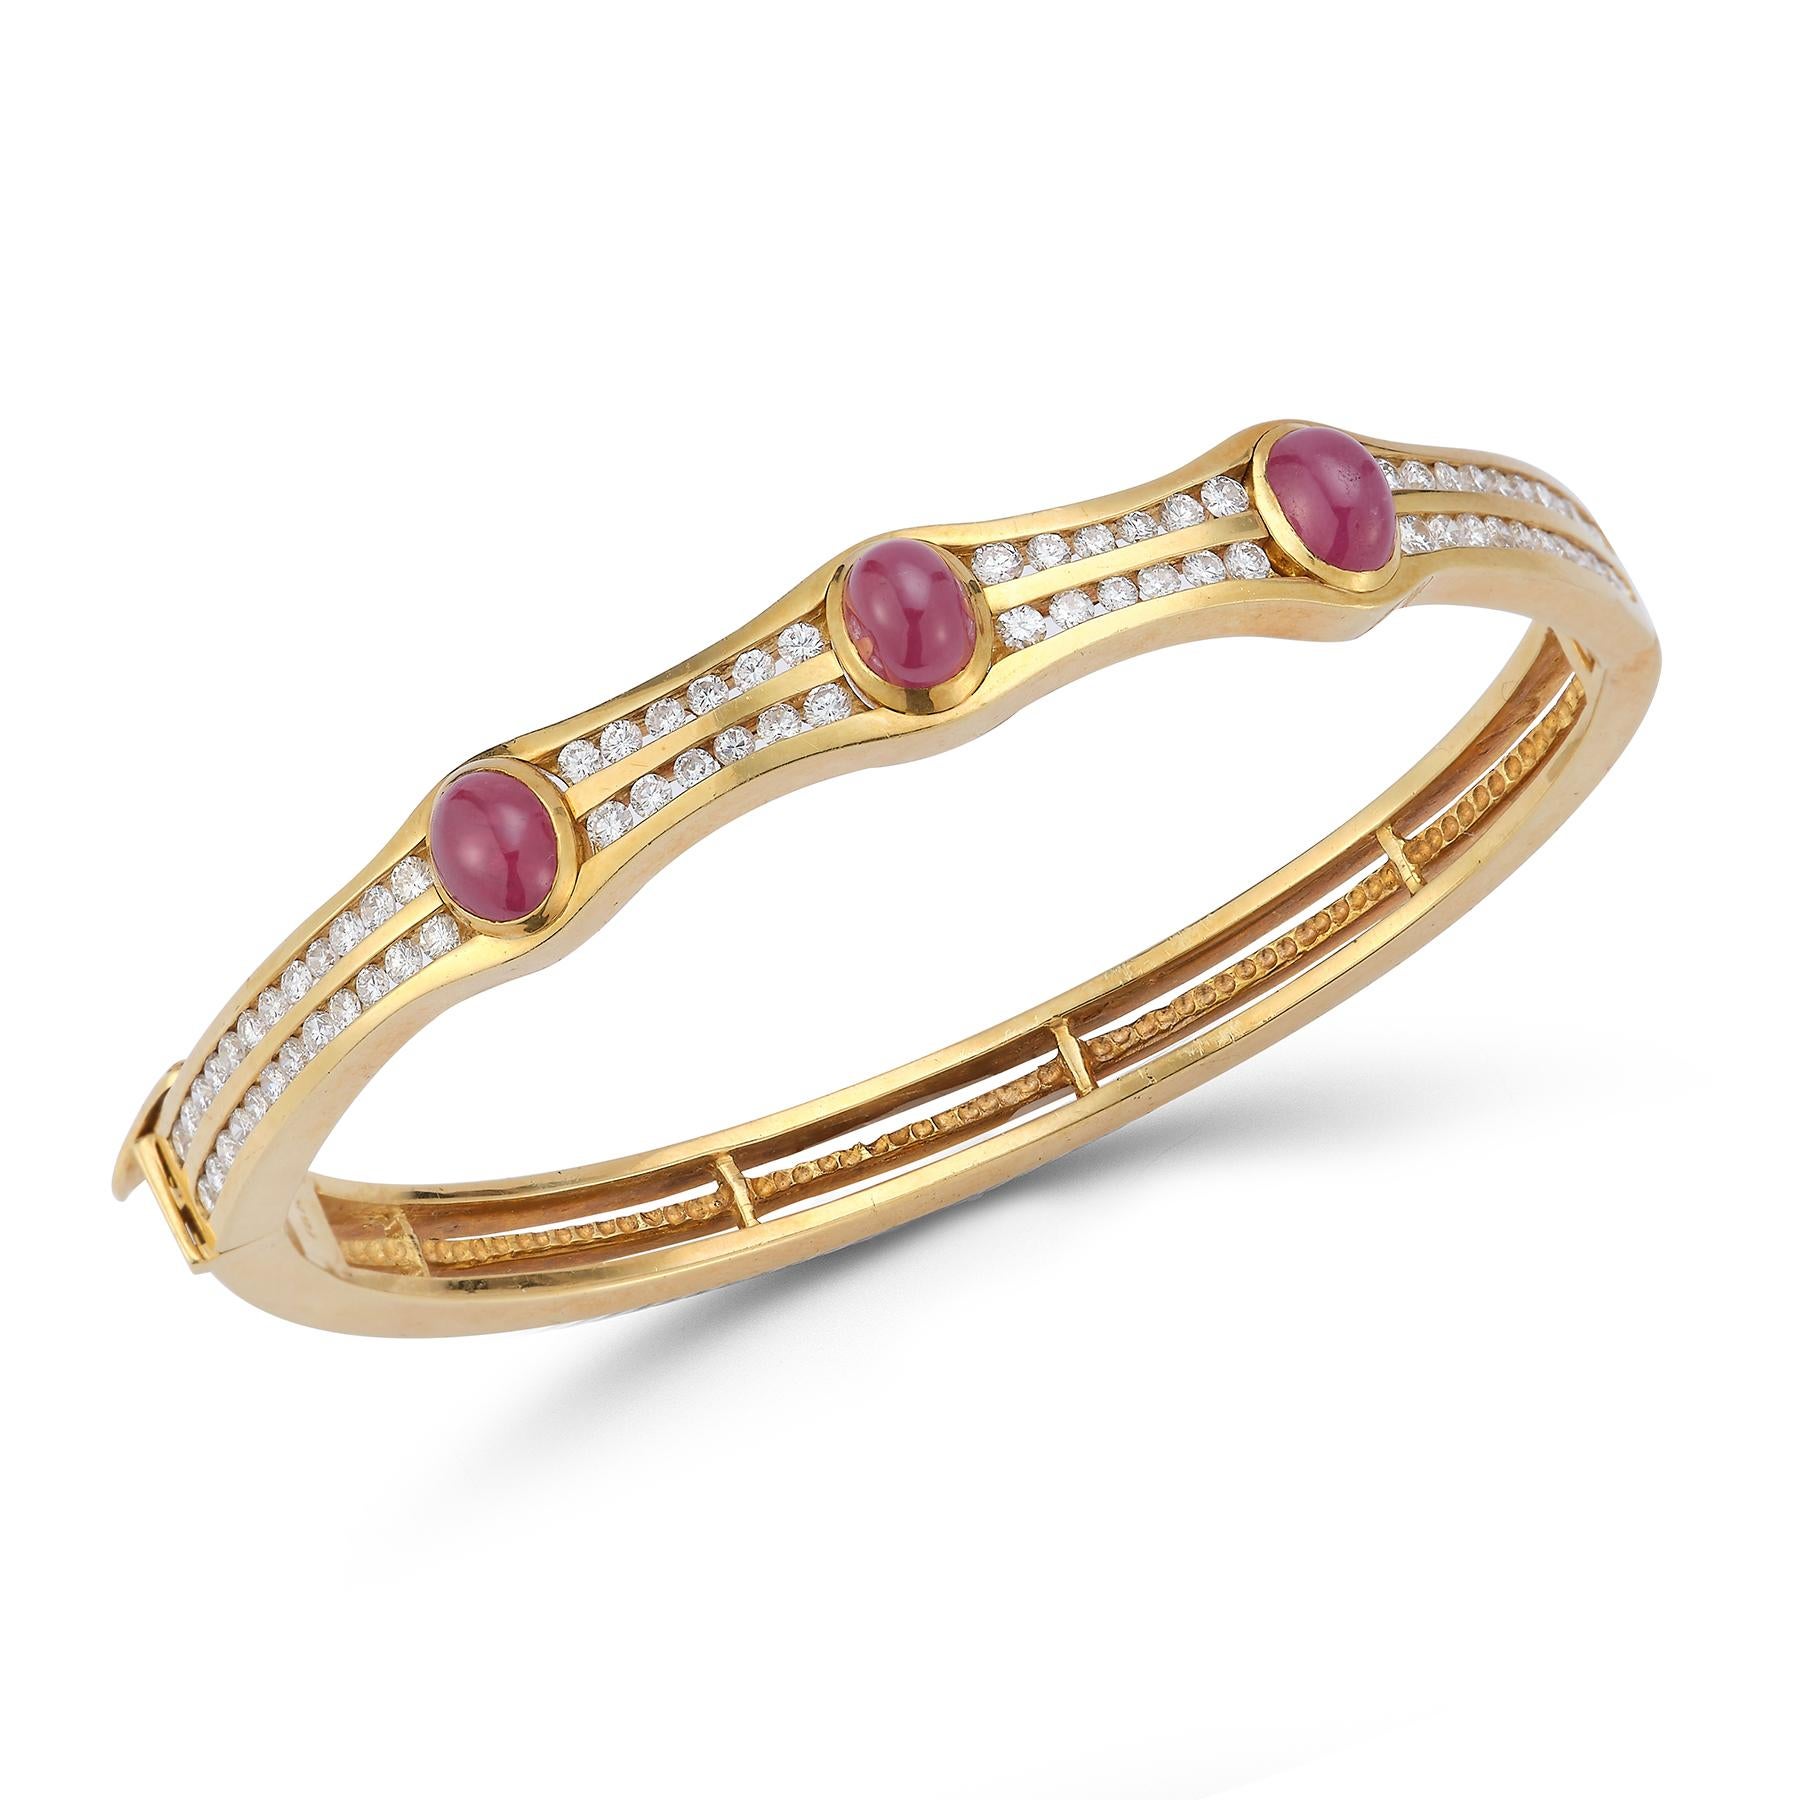 Cabochon Ruby & Diamond Gold Bangle 

3 cabochon rubies weight approximately 4.21 cts with 2 rows of round cut diamonds approximately 1.53 cts set in 18k yellow gold.

Measurements: 2.75